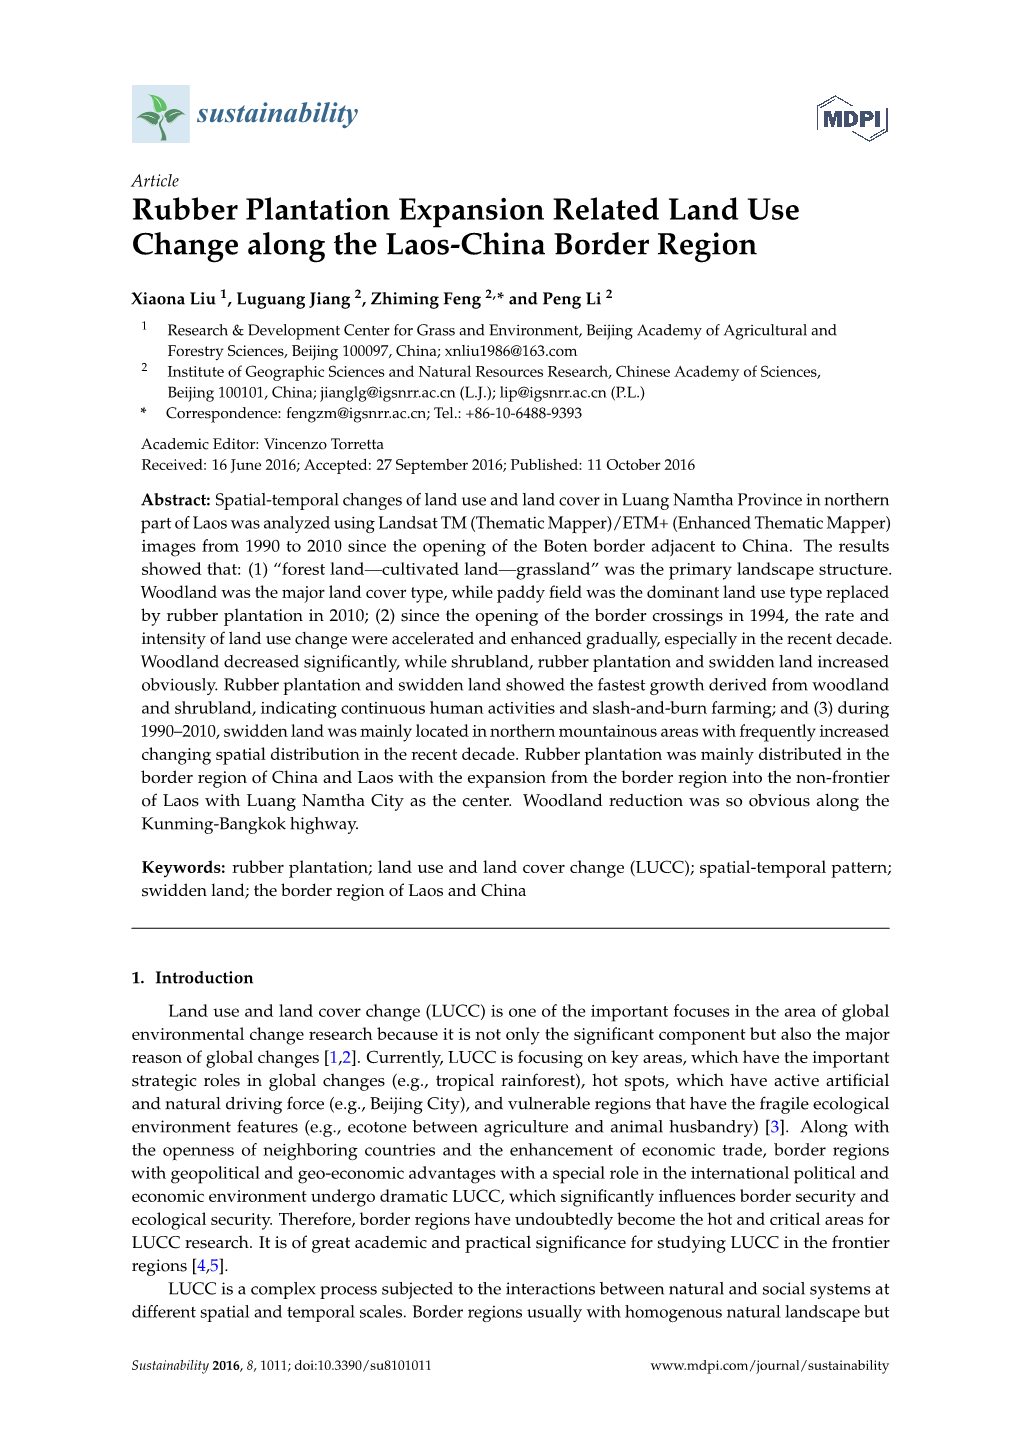 Rubber Plantation Expansion Related Land Use Change Along the Laos-China Border Region